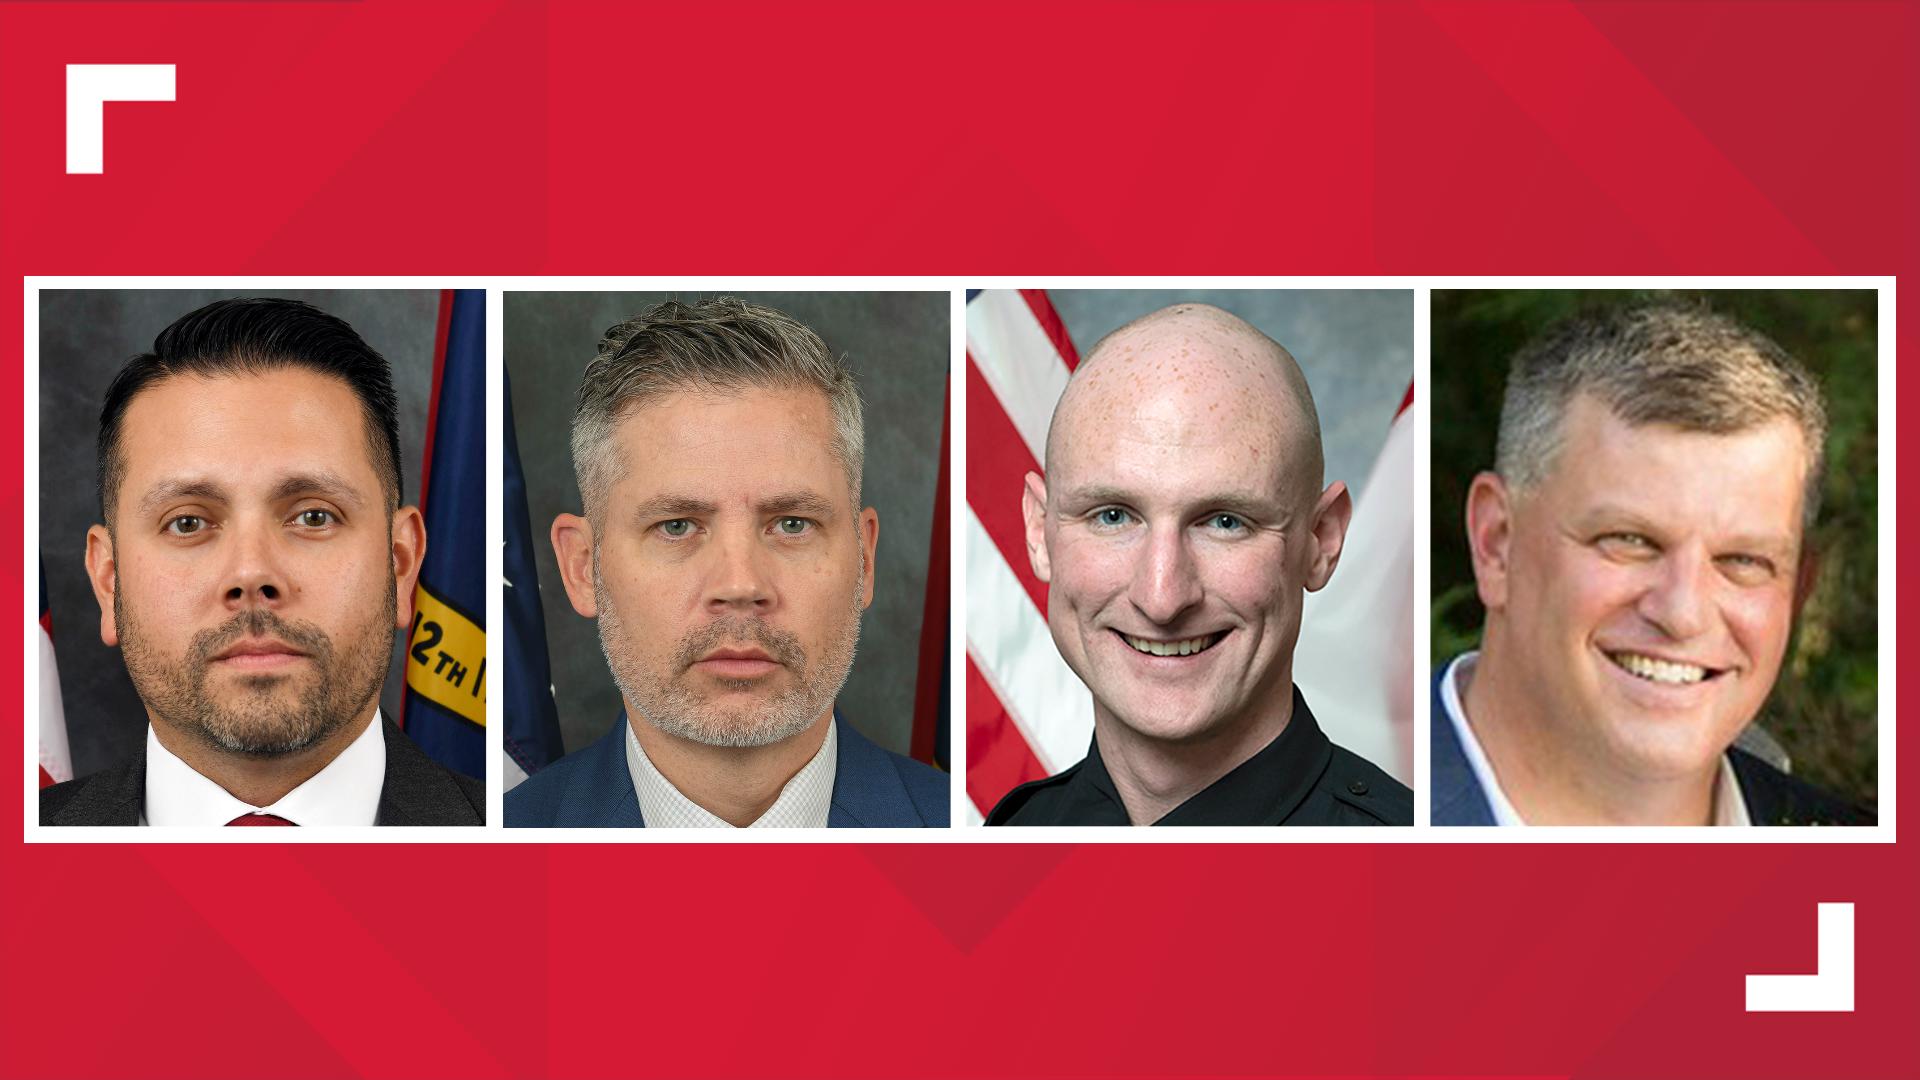 The Tunnel to Towers Foundation announced Thursday that it will provide free homes to the families of four officers killed in the line of duty in Charlotte.